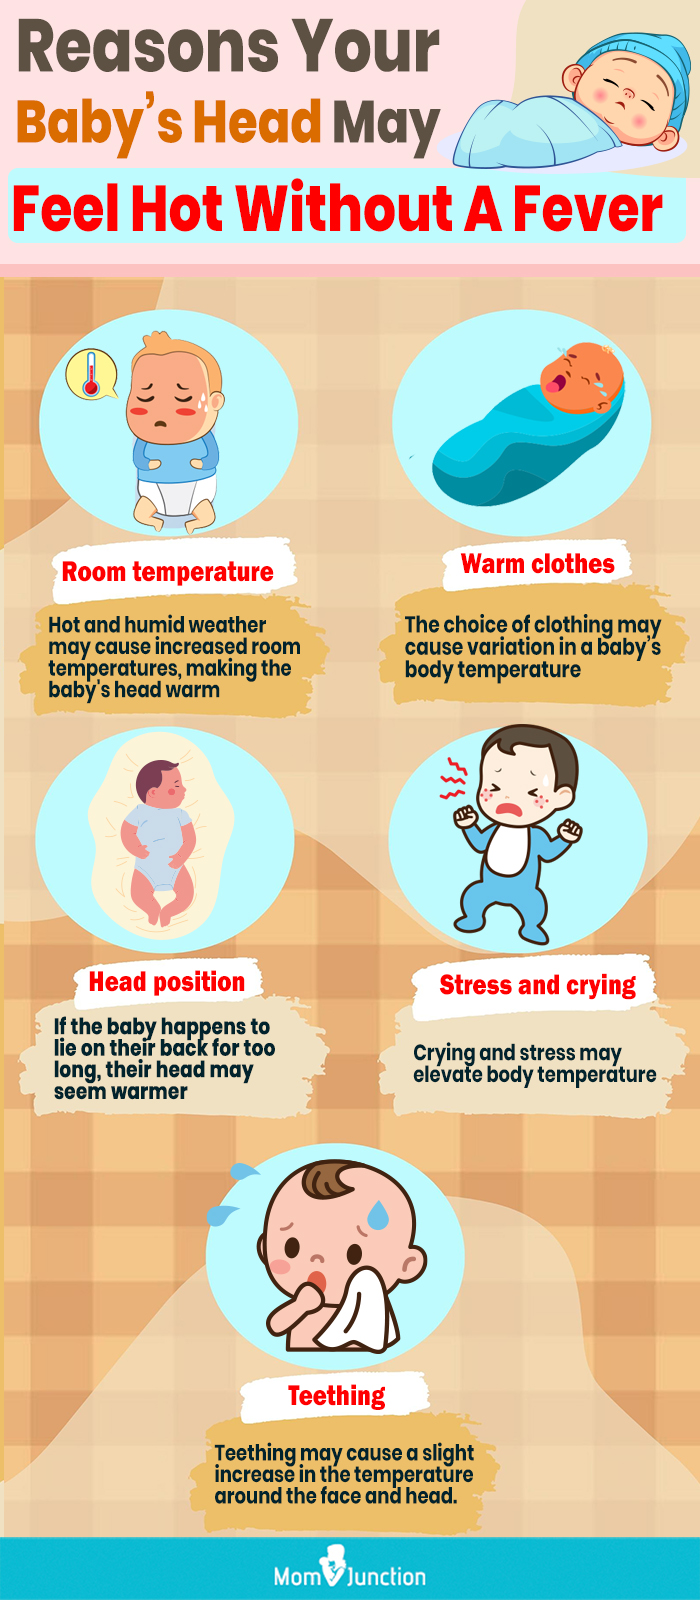 reasons your baby’s head may feel hot without a fever [infographic]